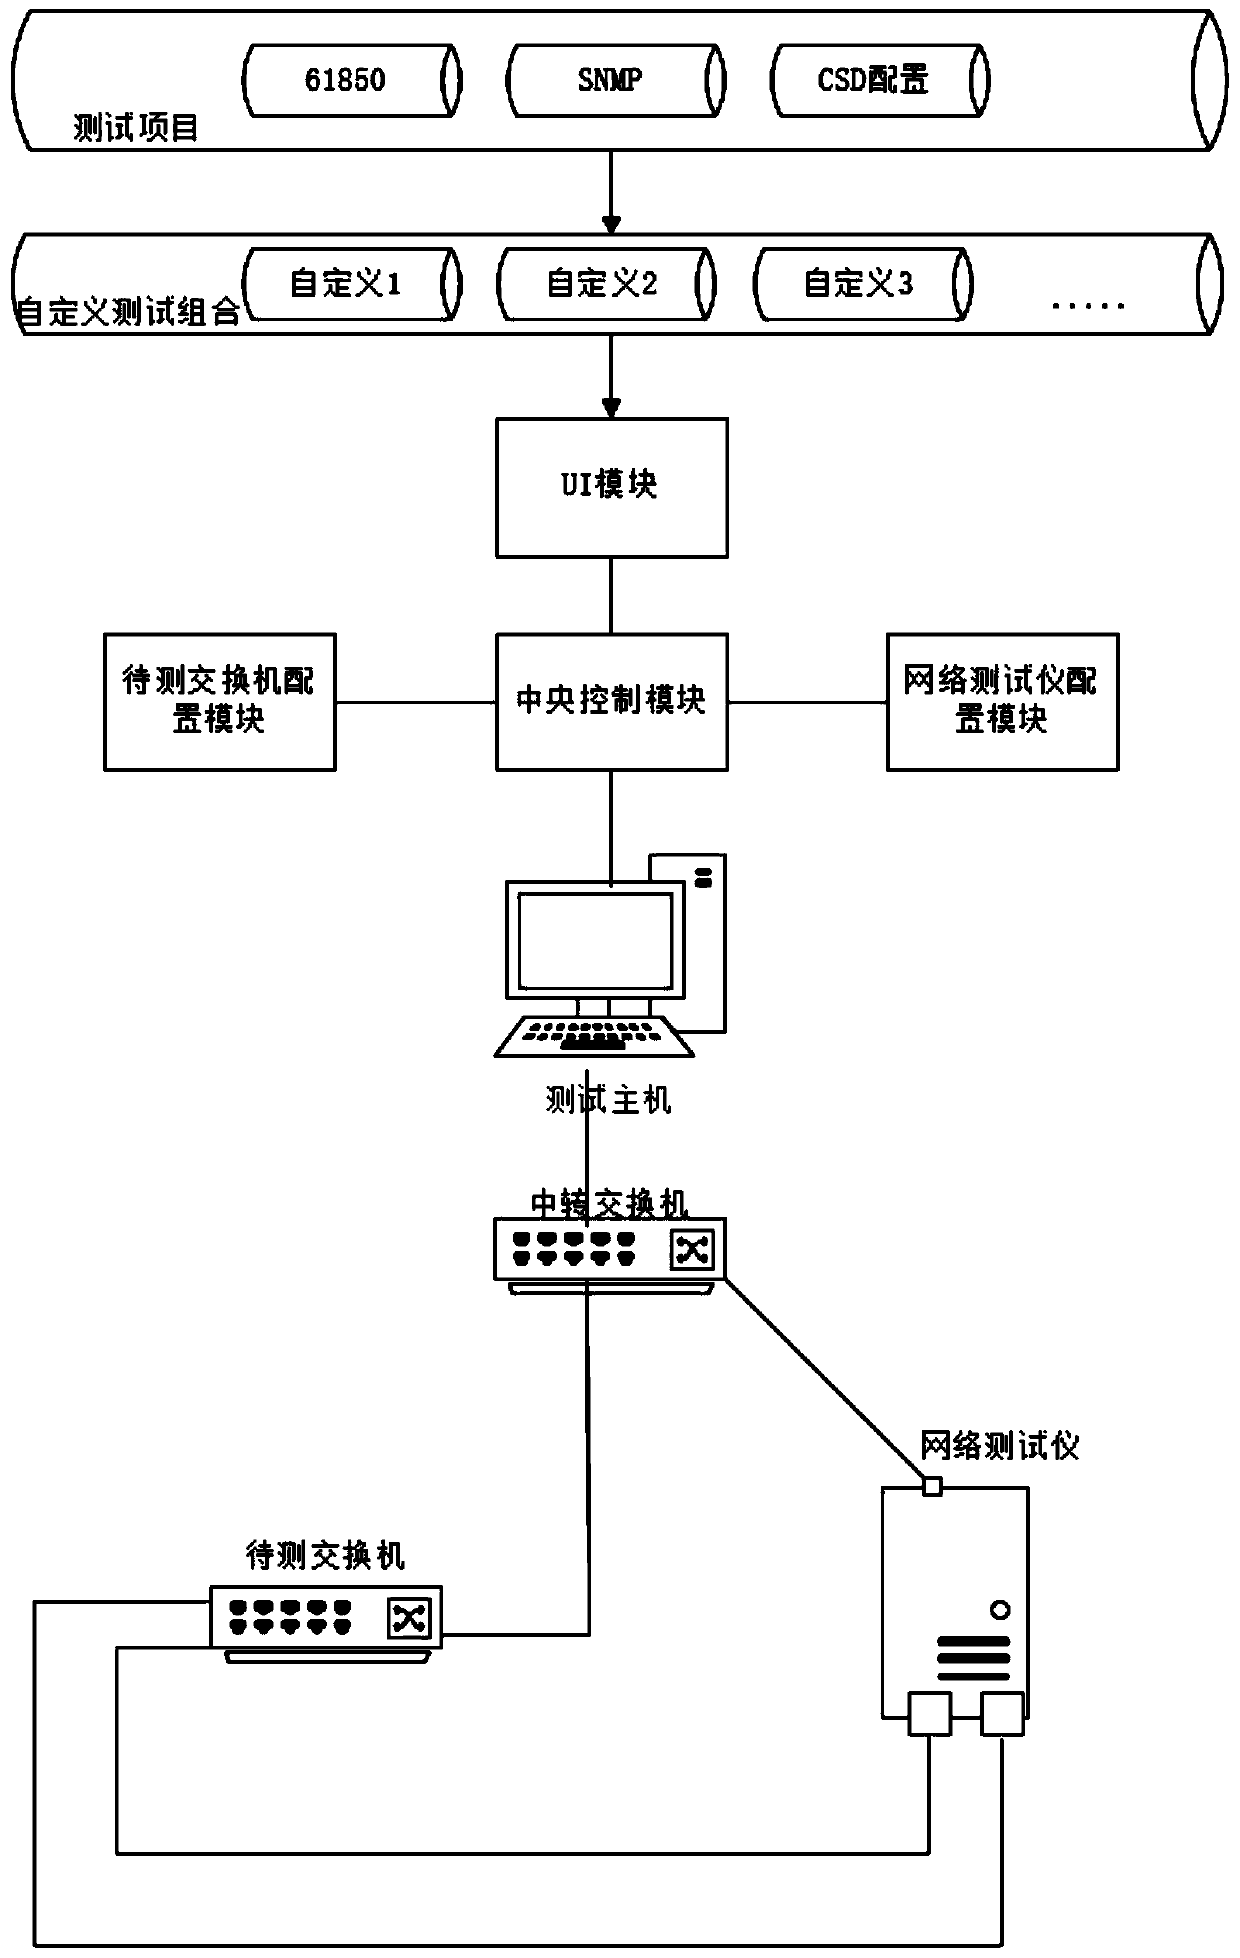 Production automation test method of industrial Ethernet switch